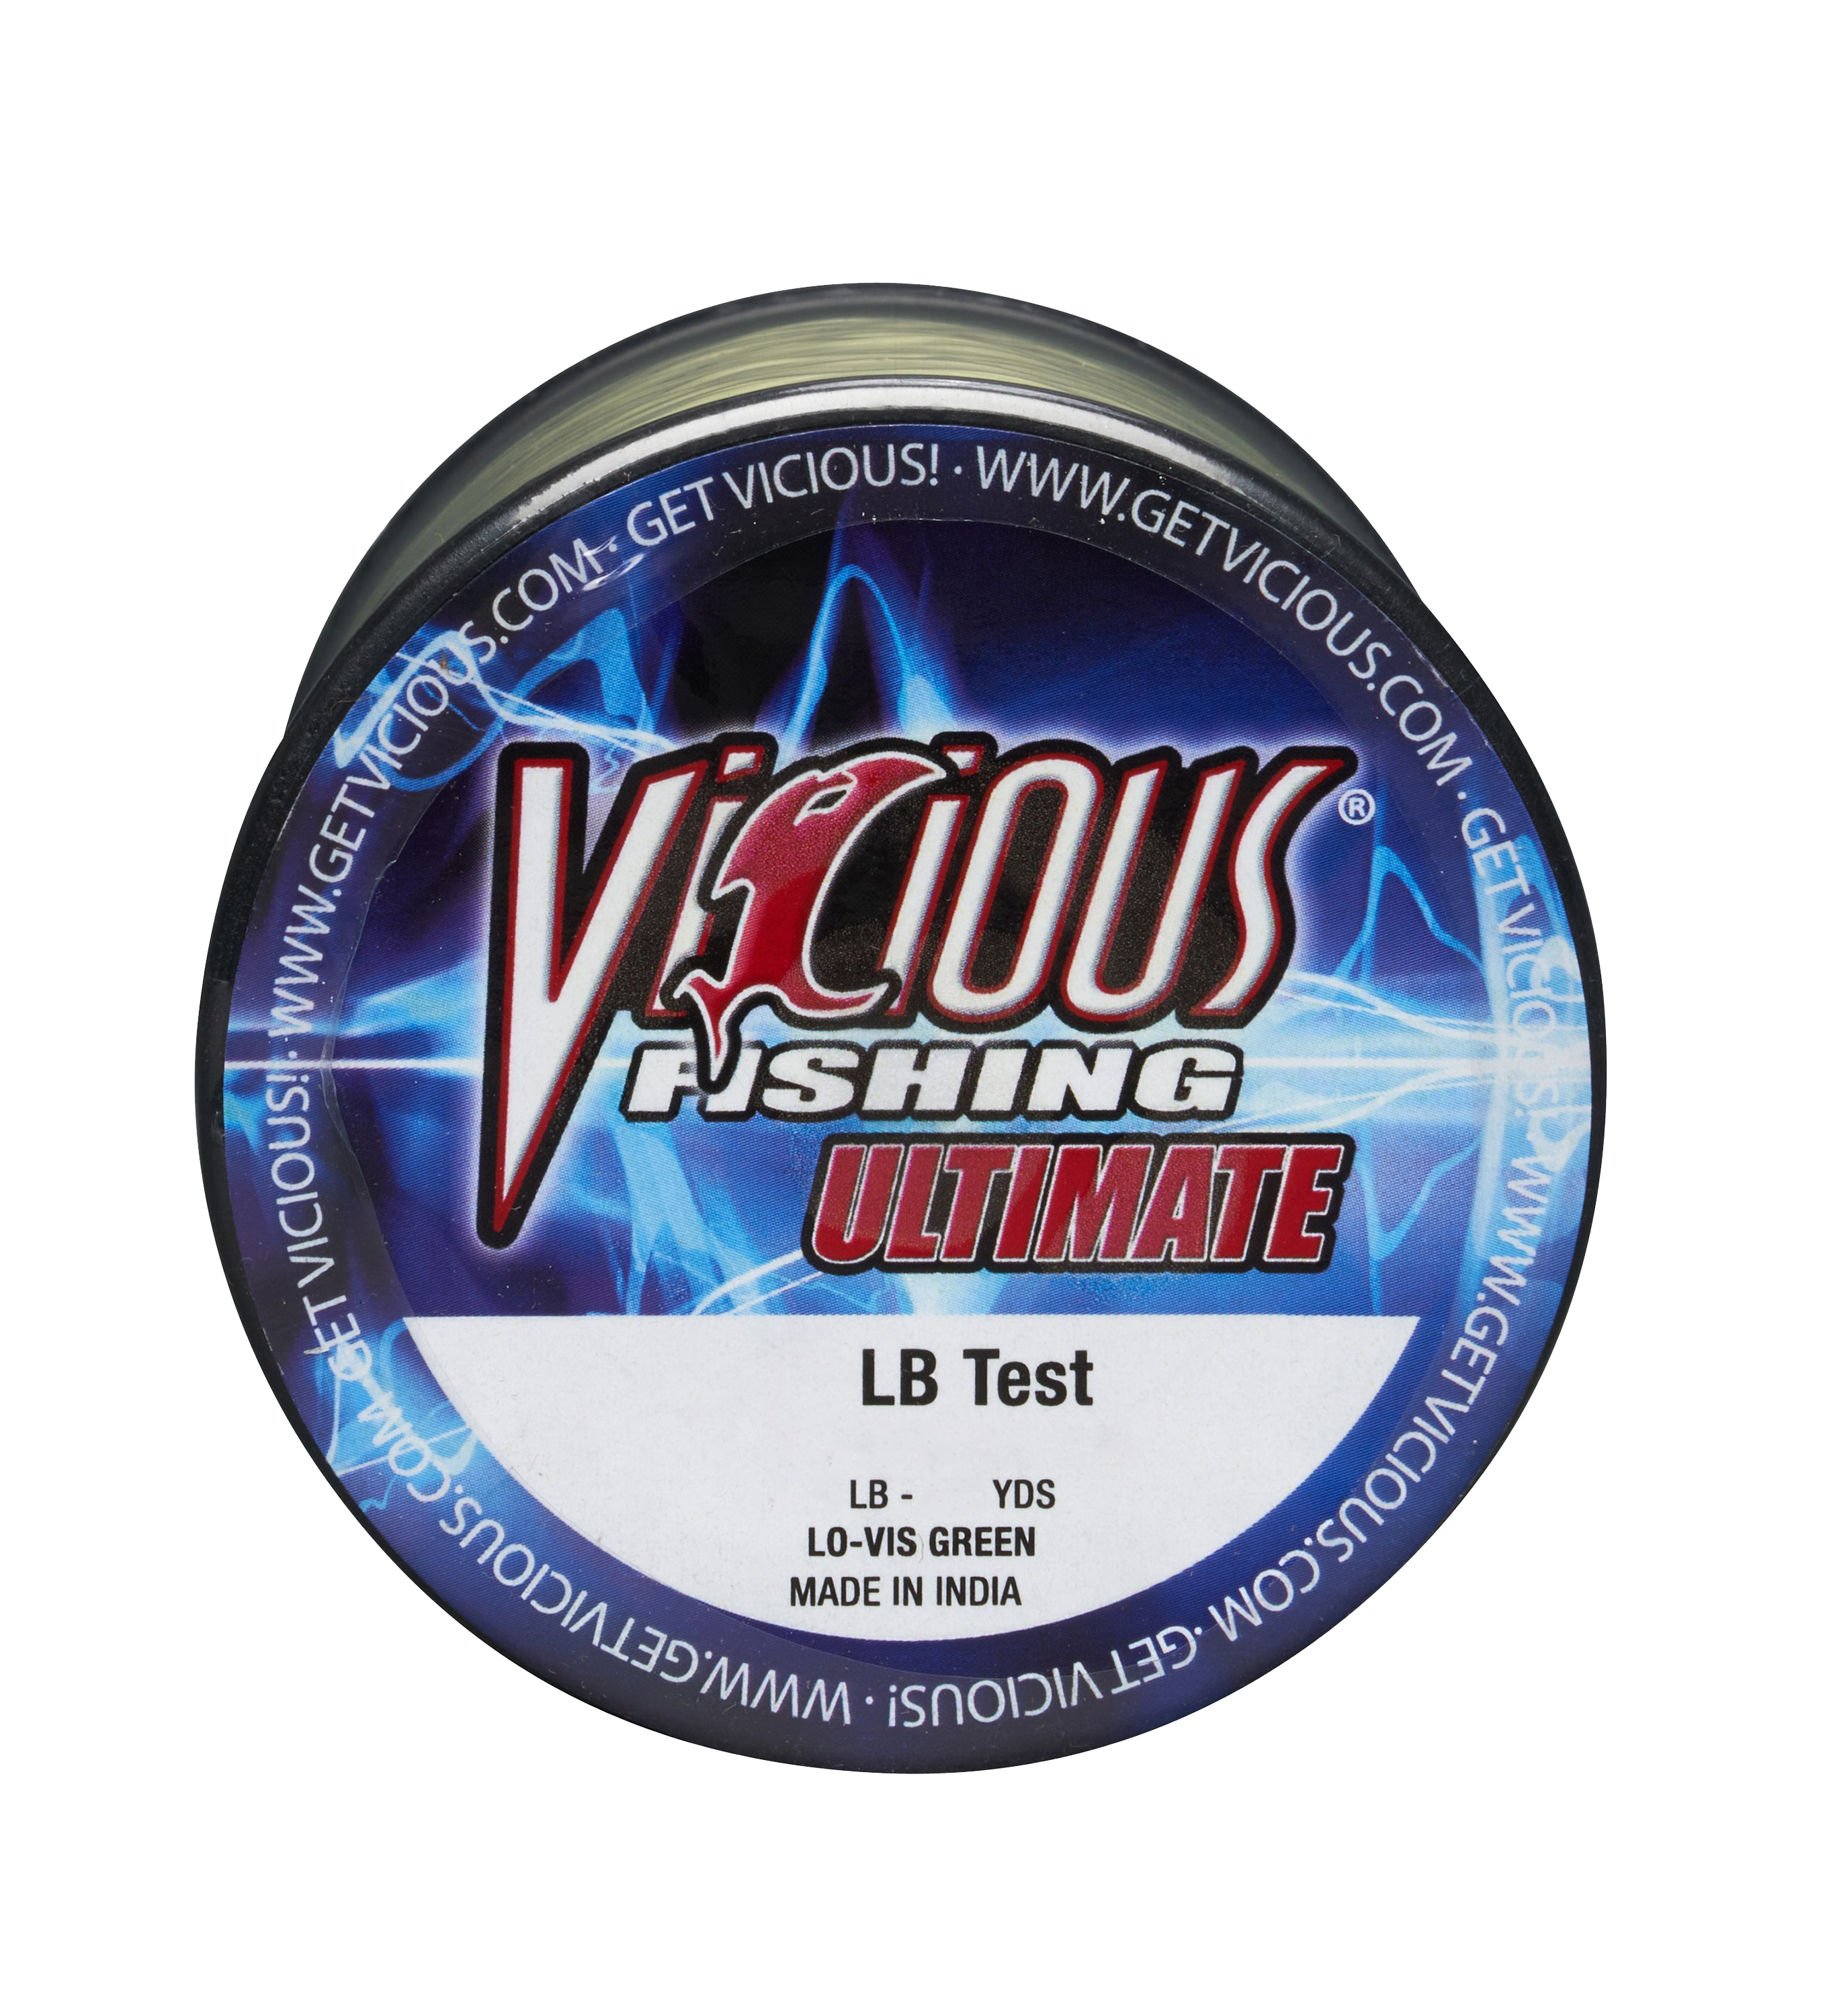 Vicious Ultimate Act Fishing Line 20 lb Test 330yds Mauritius